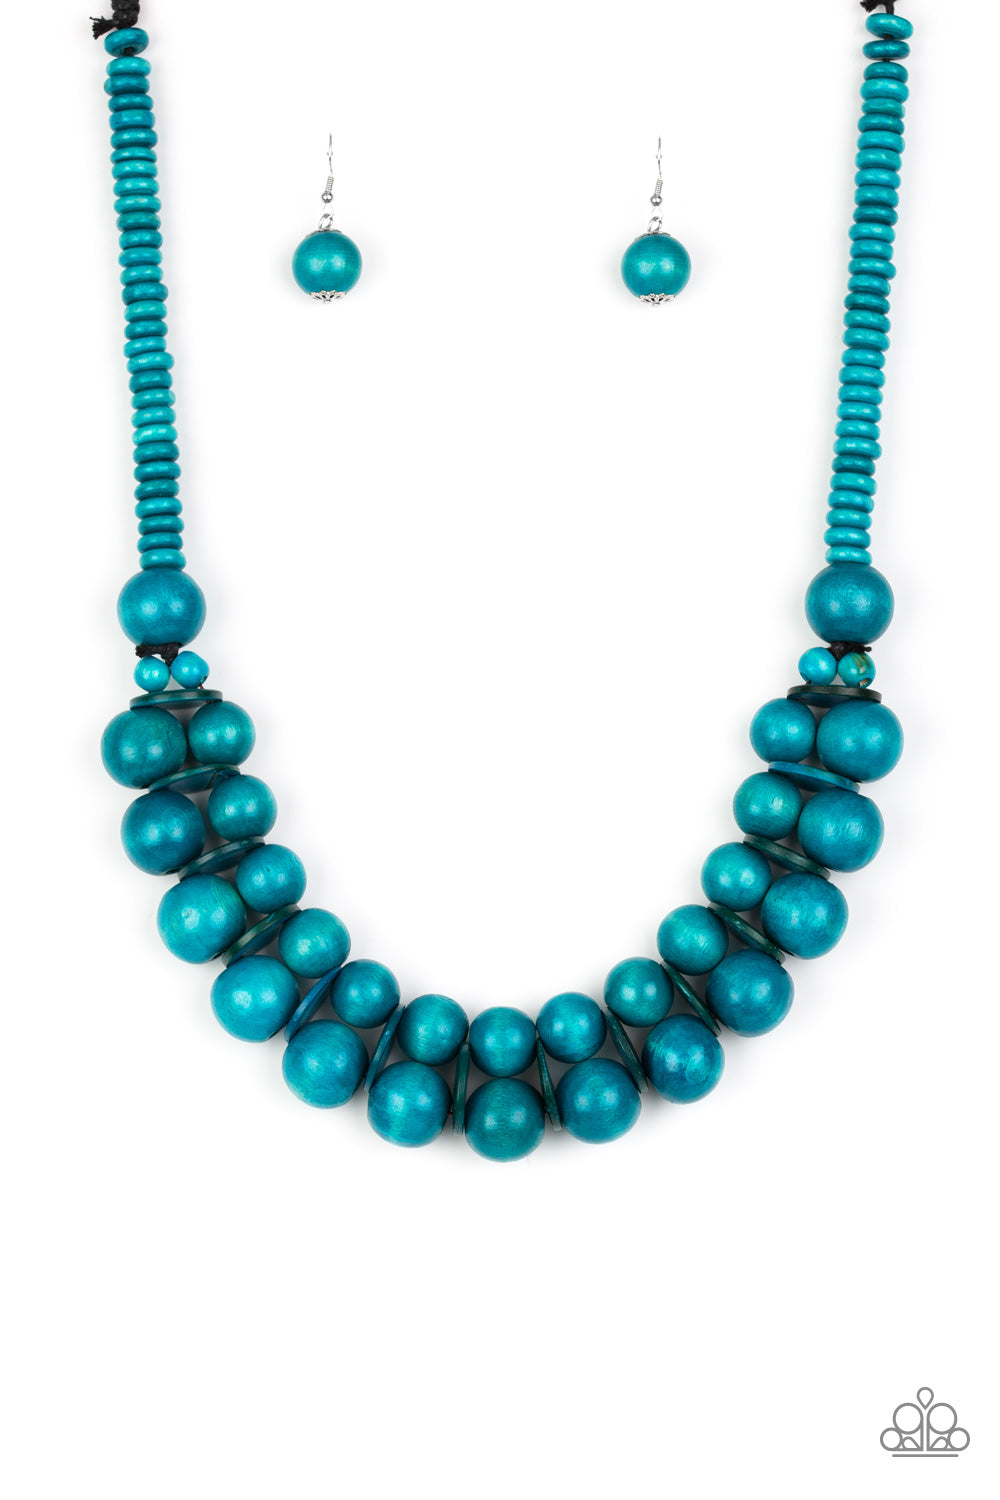 Paparazzi Accessories Caribbean Cover Girl - Blue Wood Necklaces - Lady T Accessories